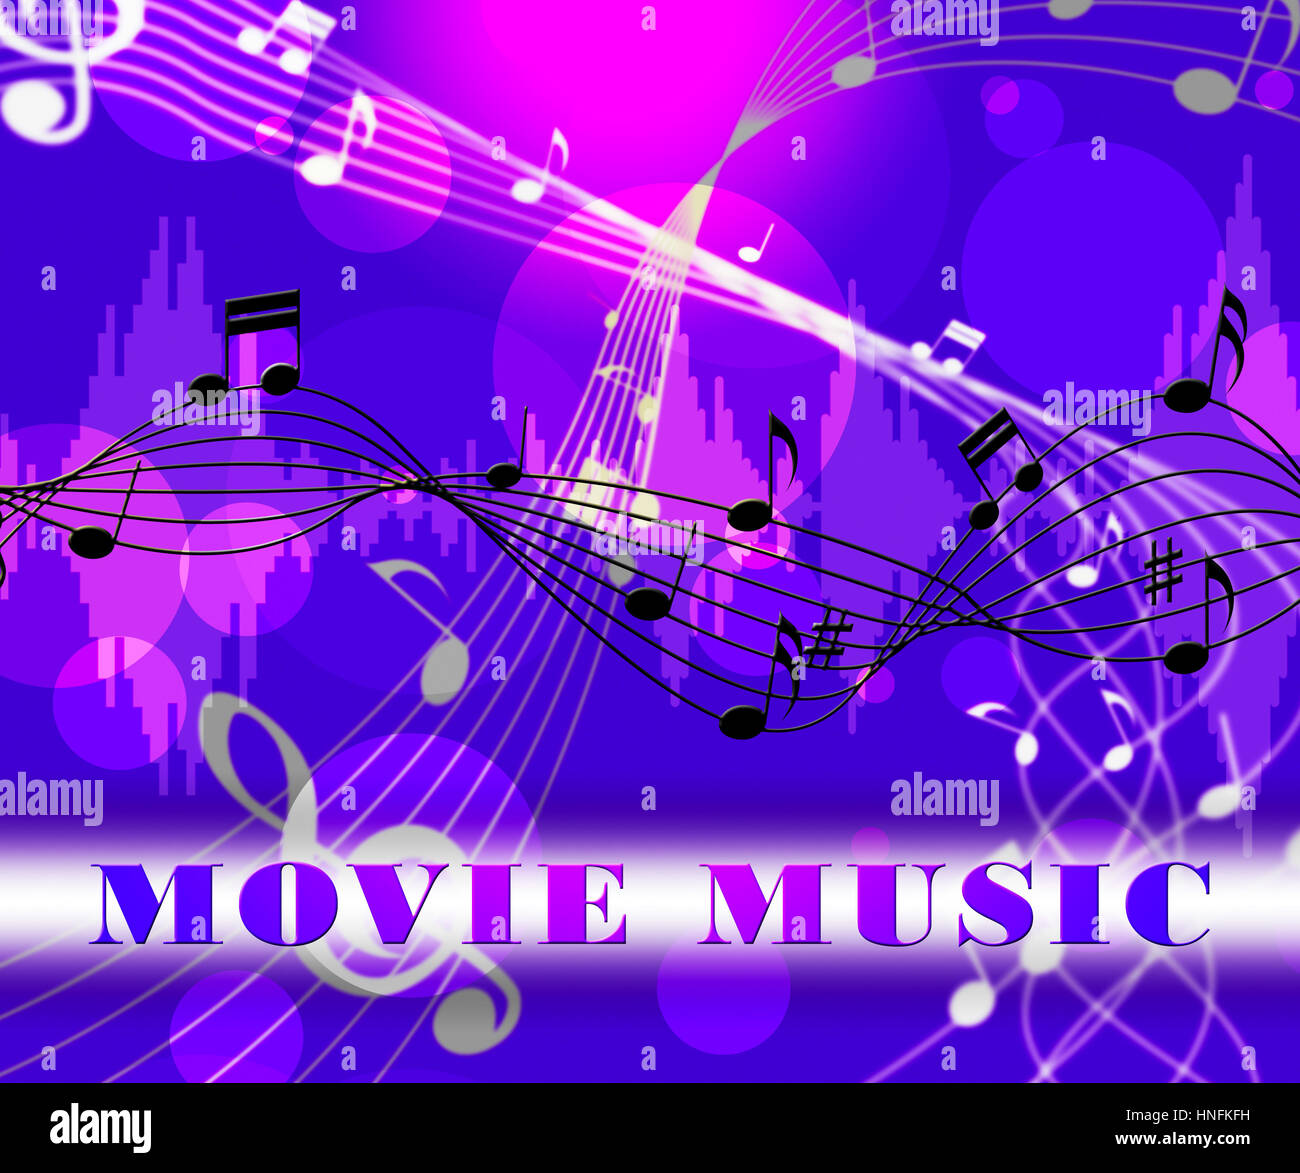 Movie Music Floating Notes Means Songs From Film Soundtracks Stock Photo